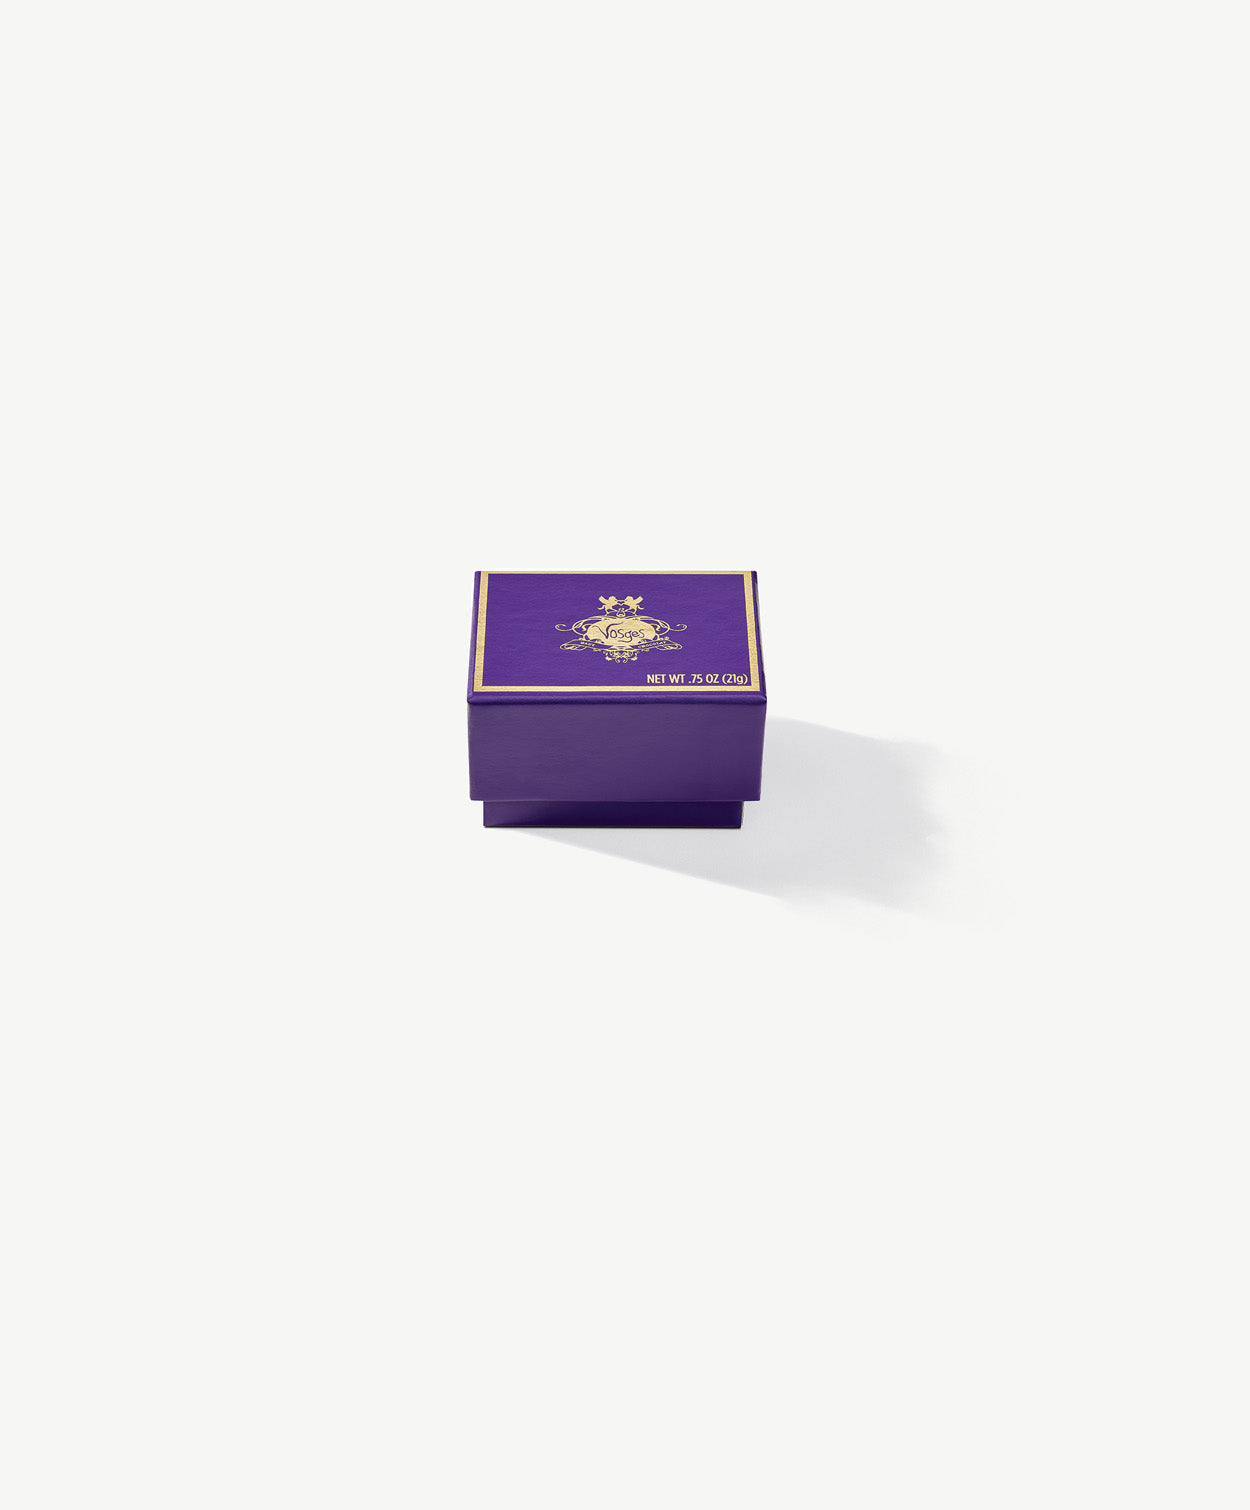 A small purple Vosges Chocolate box embossed with gold foil on a grey background.